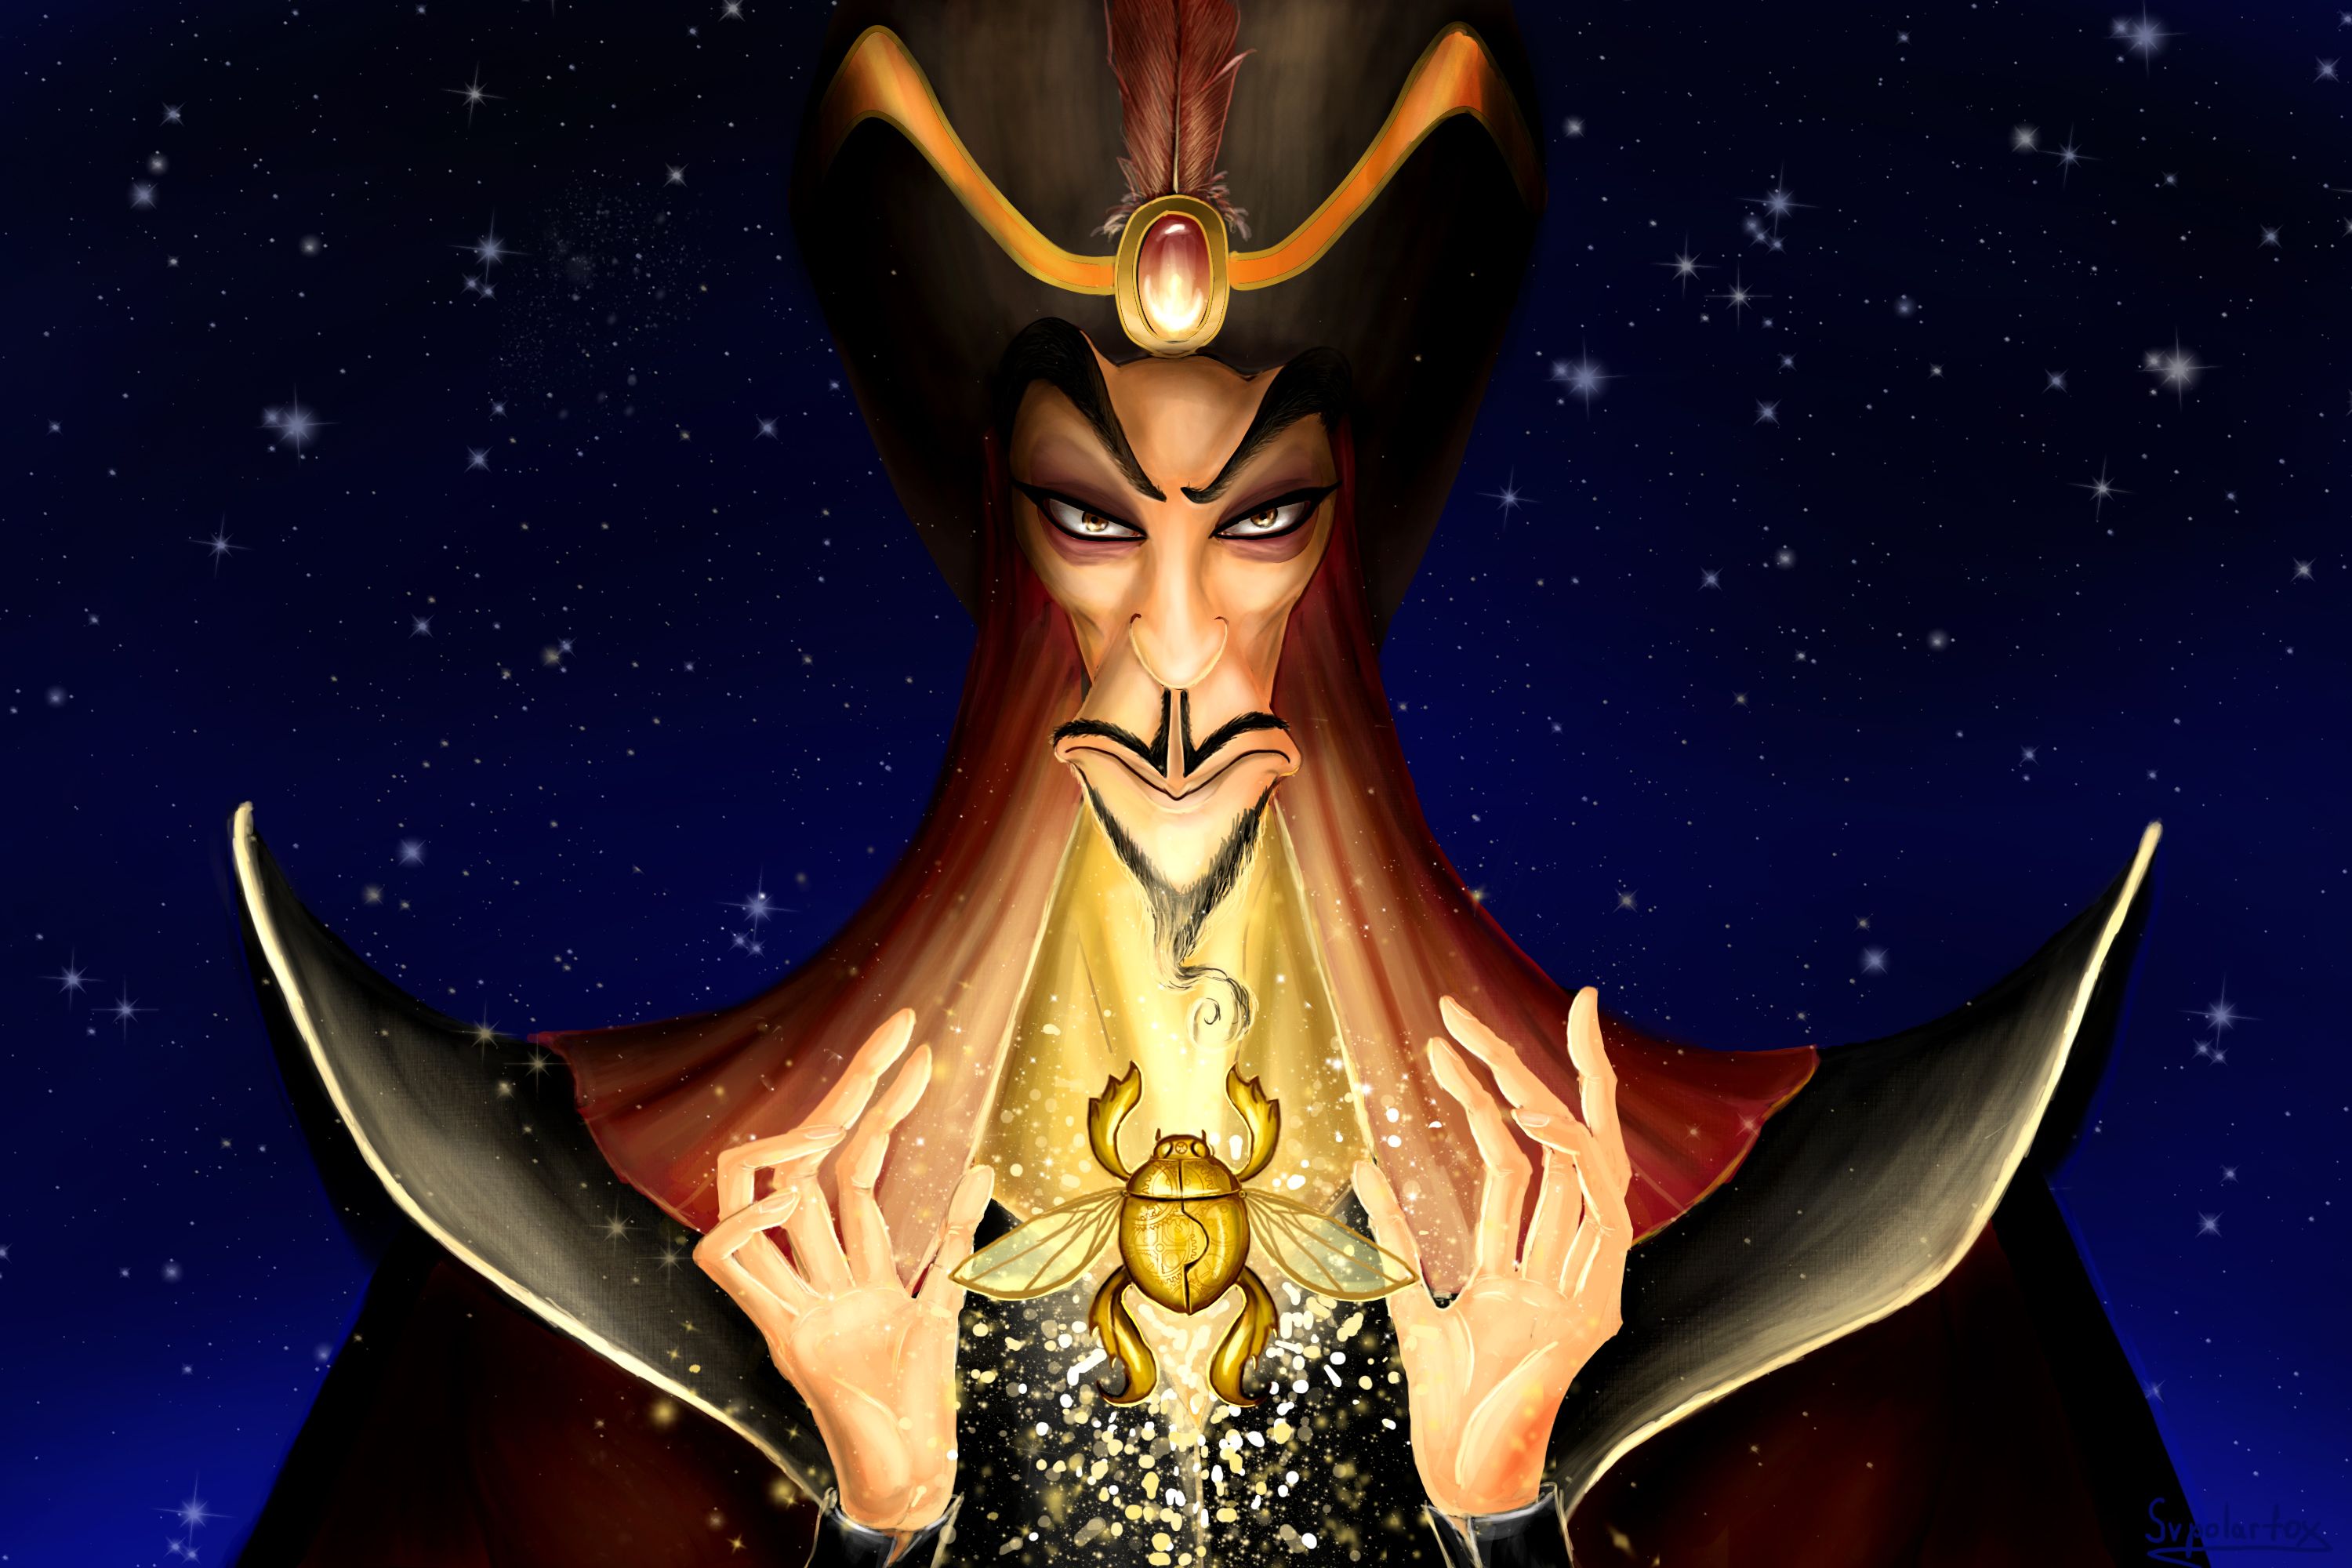 Aladdin: 10 Fan Art Pieces Of Jafar That Will Give You The Chills